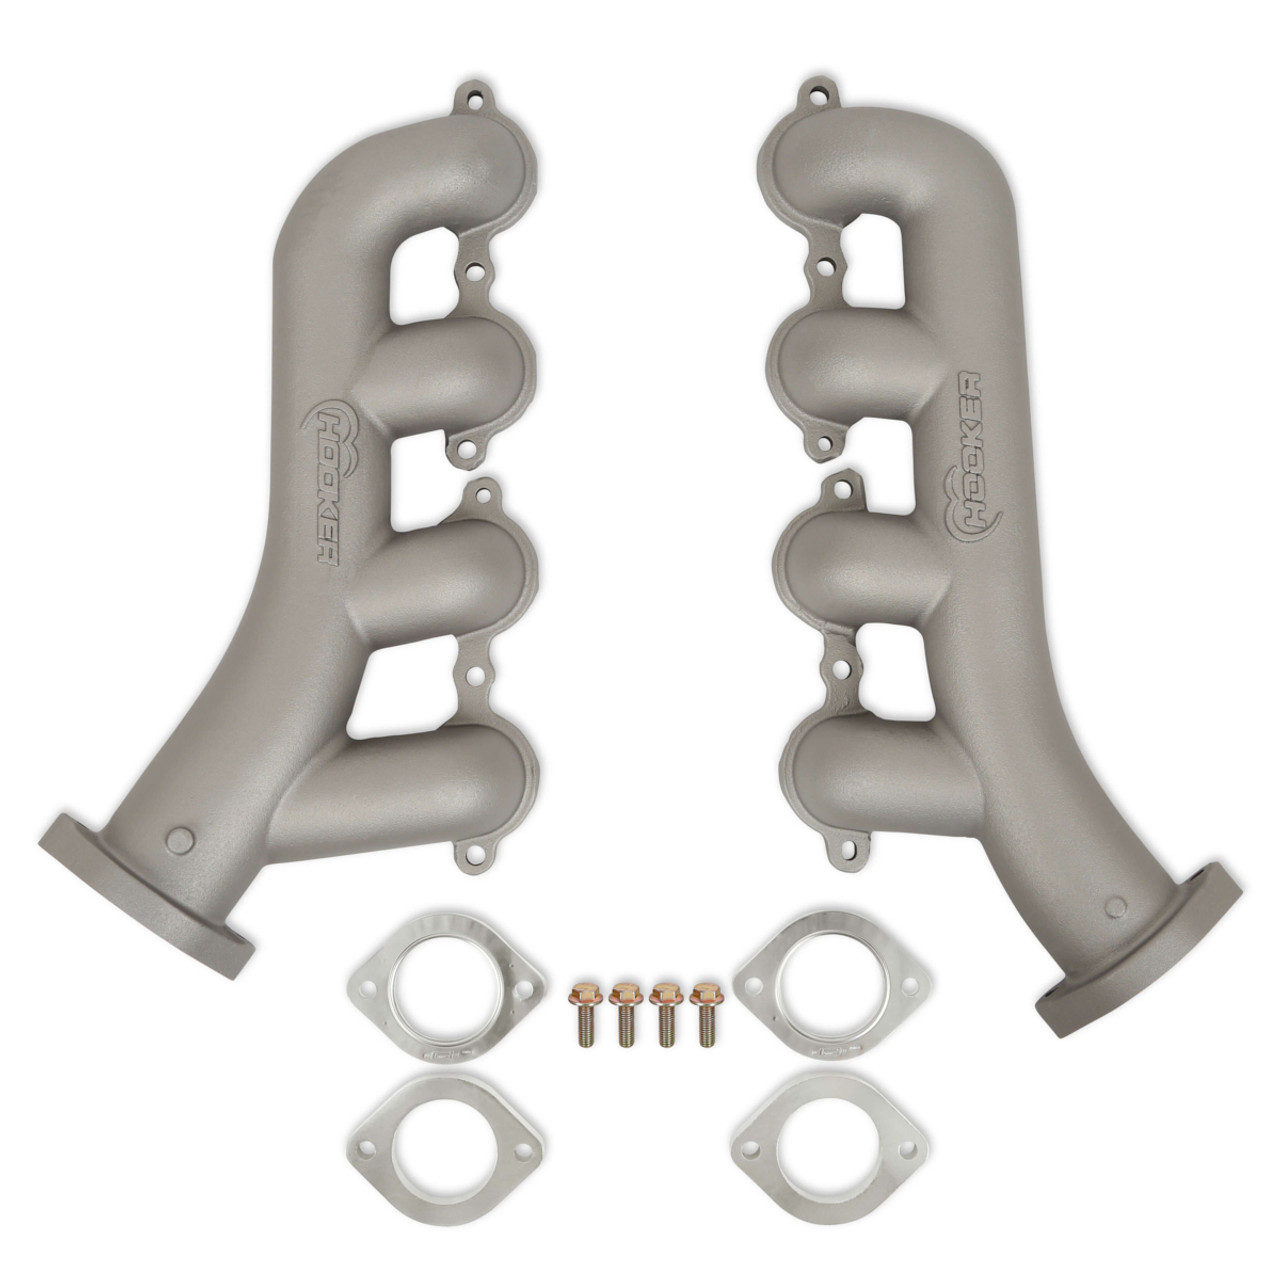 Hooker Exhaust Manifold Set GM LS Swap to GM S10/Sonoma - HKRBHS595